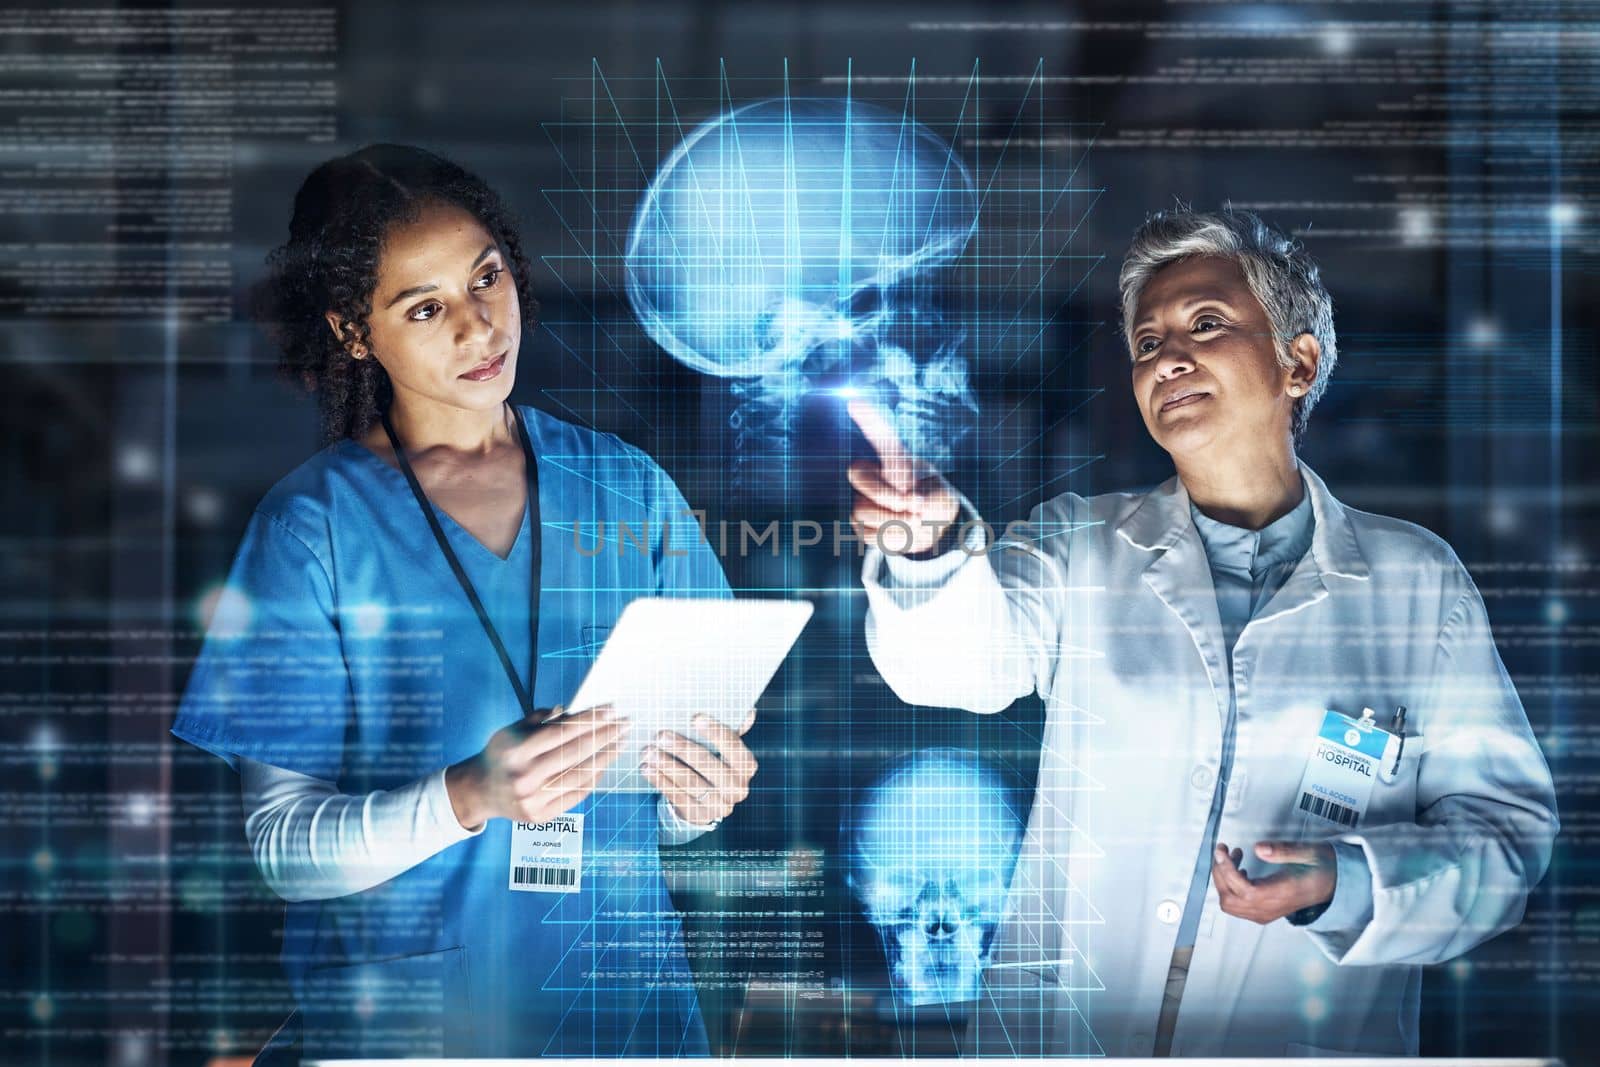 Doctors, tablet or healthcare of futuristic skull in brain cancer, mental health or fracture analytics in night hospital thinking. Abstract hologram, head or organ technology or women collaboration.